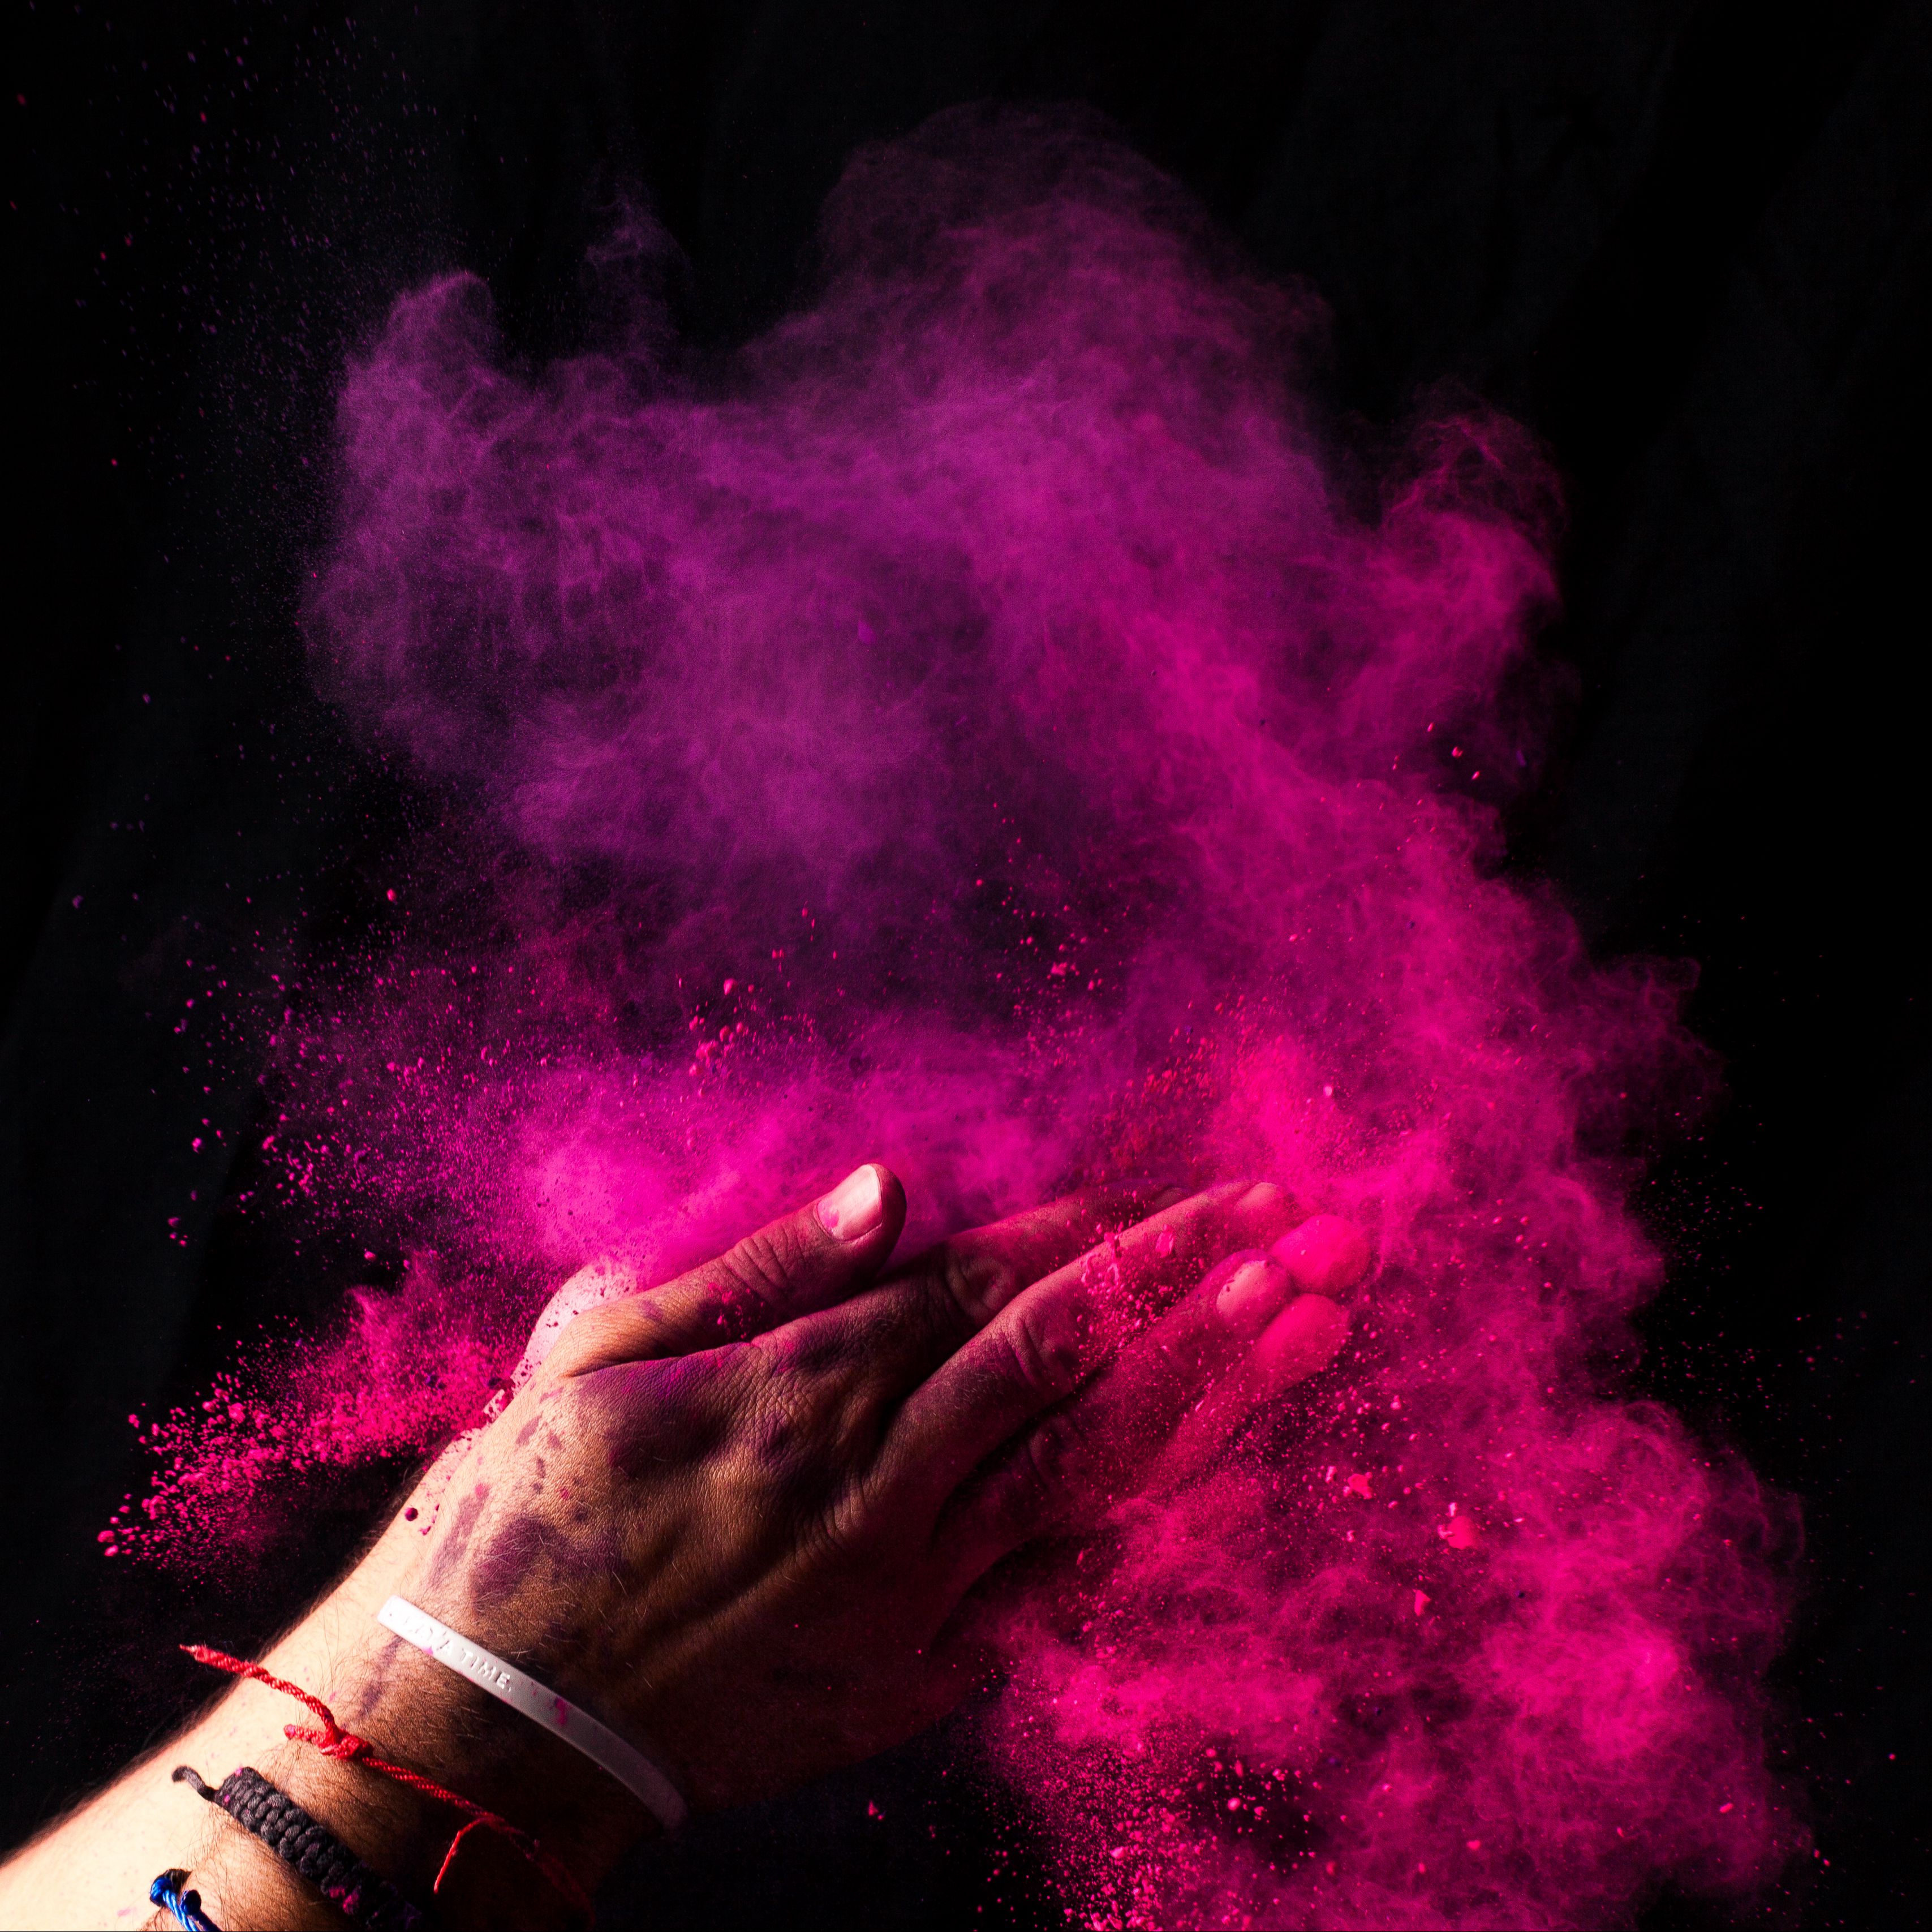 Download wallpaper 3415x3415 paint, holi, hands, colorful ipad pro 